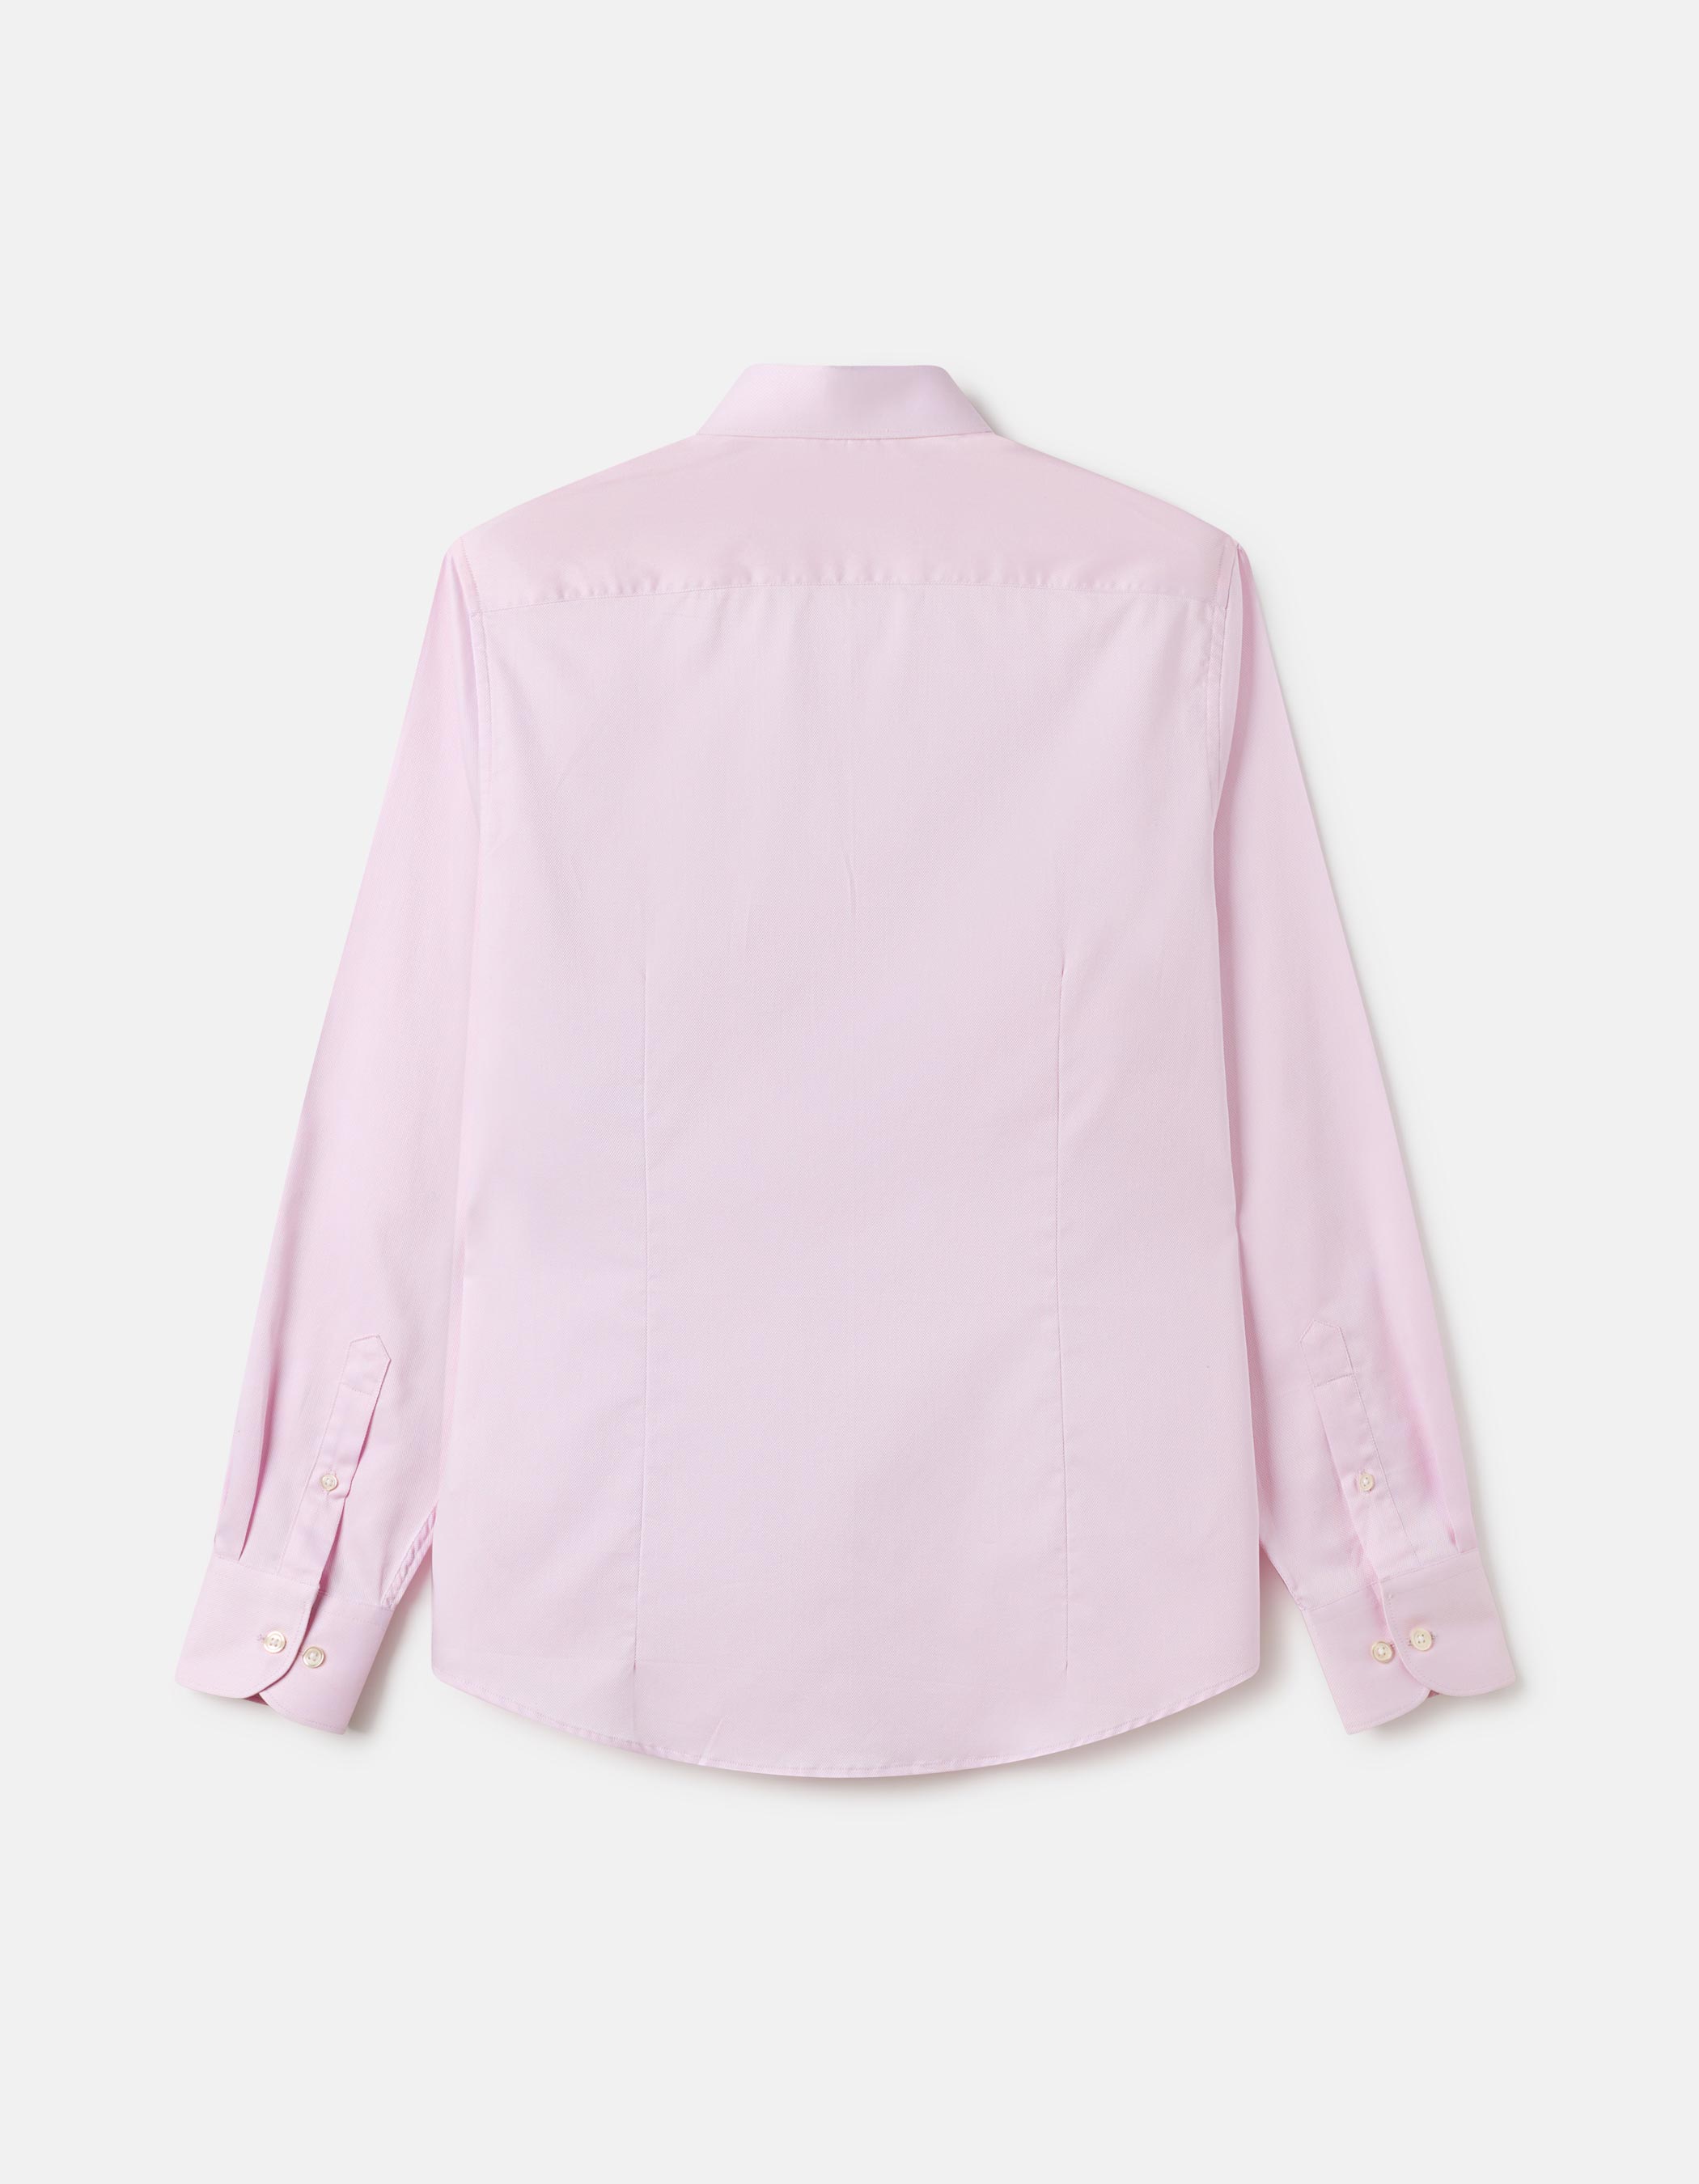 Camisa con microestructura rombo rosa 1